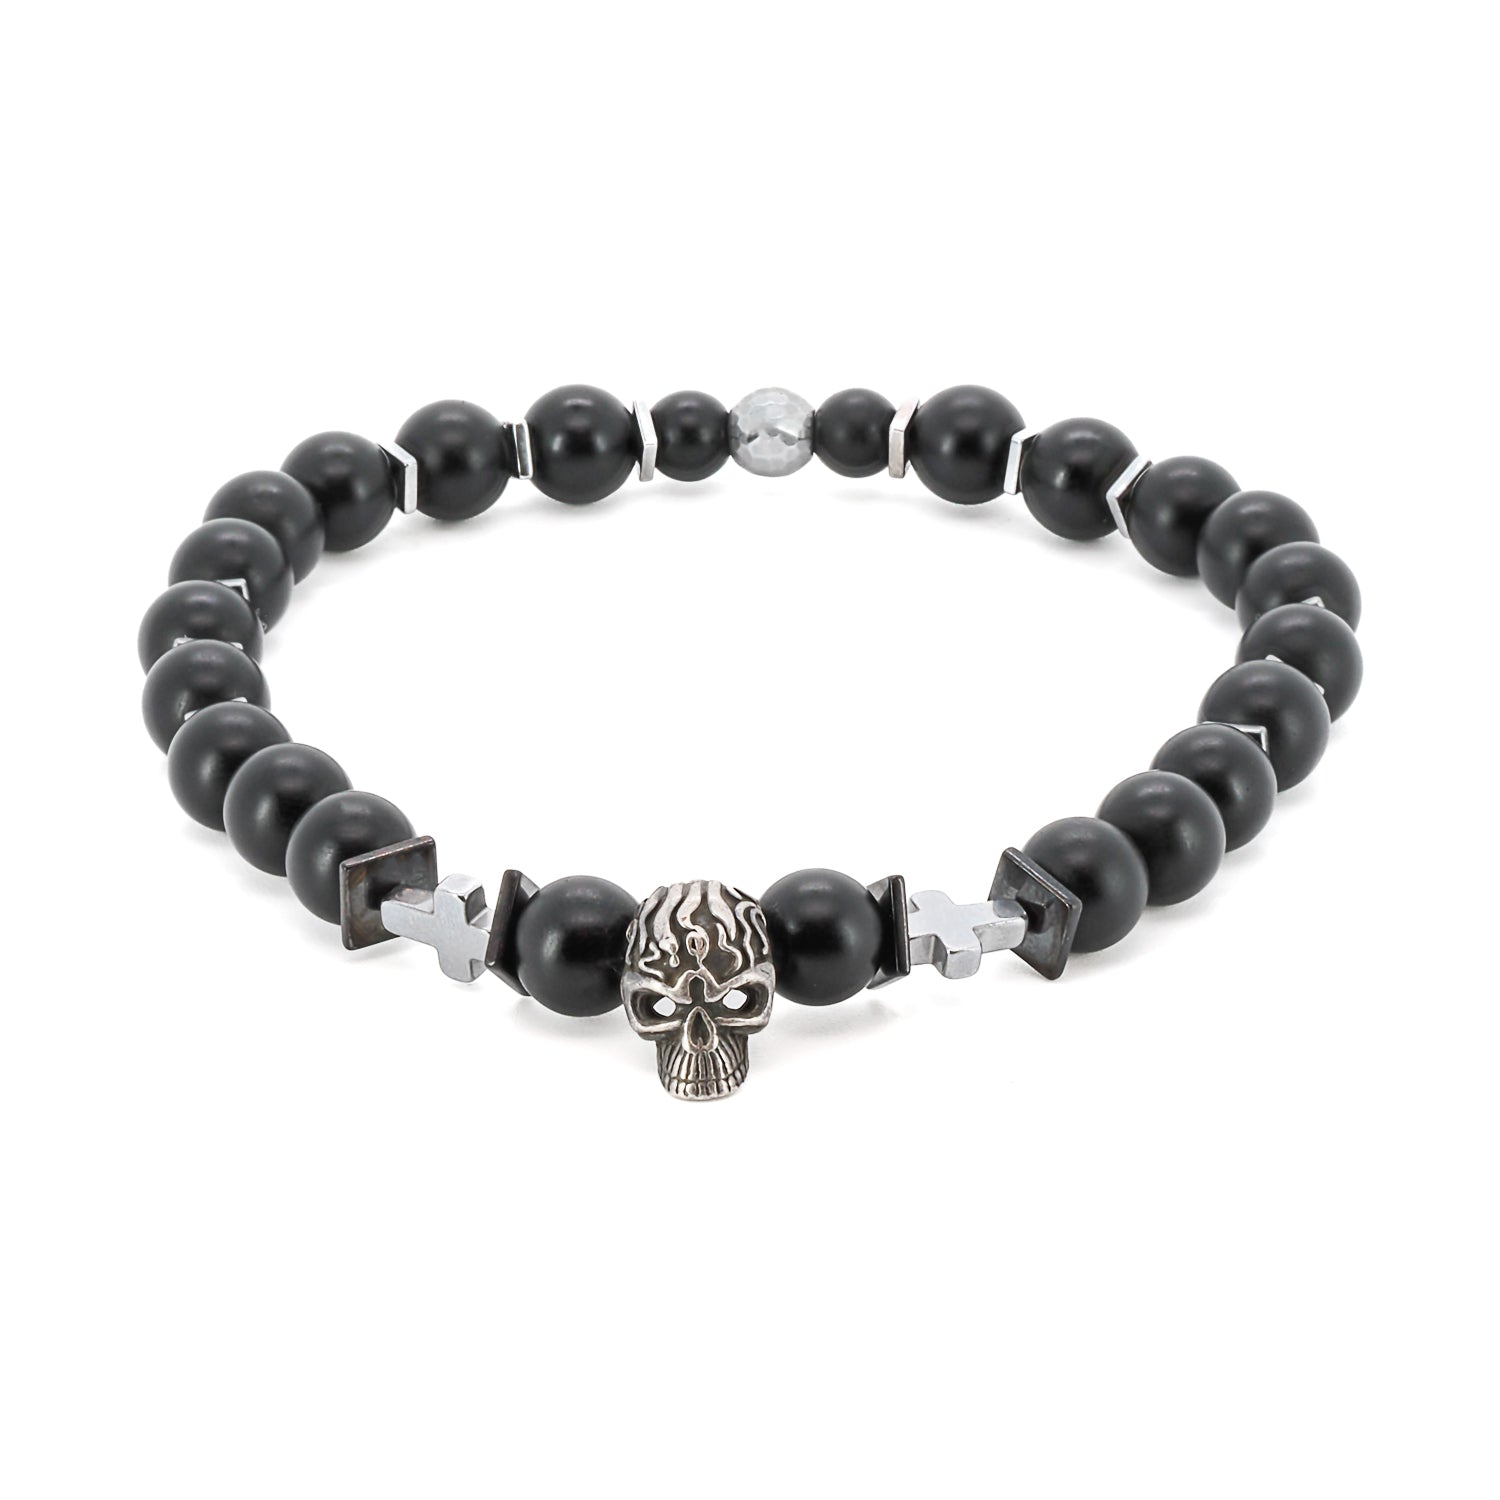 Featuring a sterling silver skull bead at its center, this handmade bracelet symbolizes transformation and embracing the impermanence of life. 